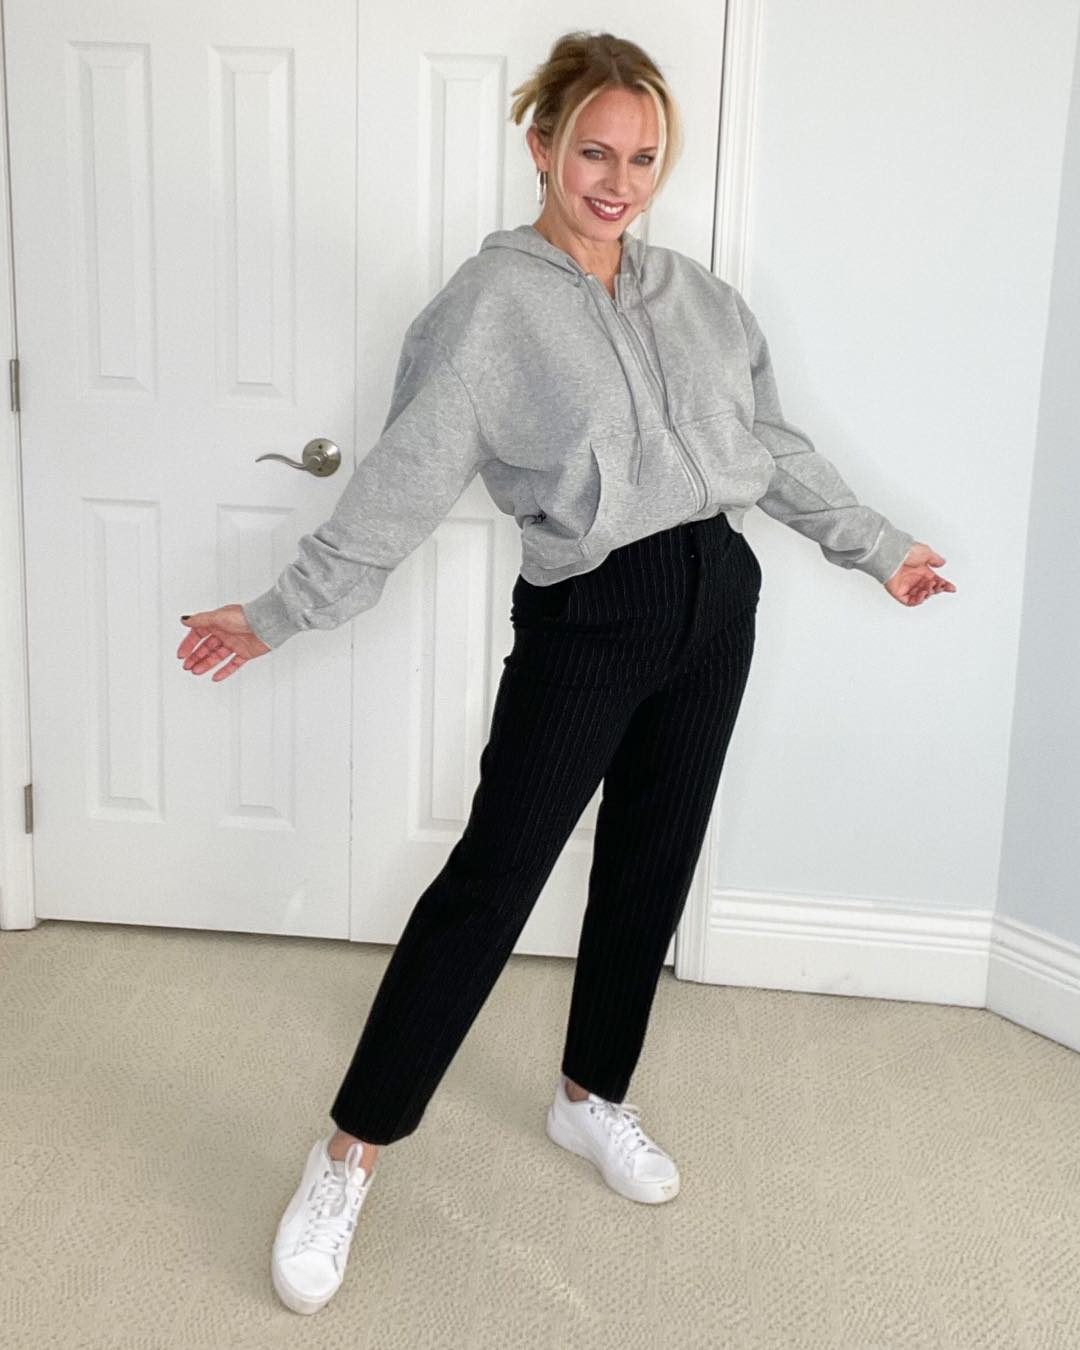 I Styled 4 Looks with the World’s Most Versatile Pant